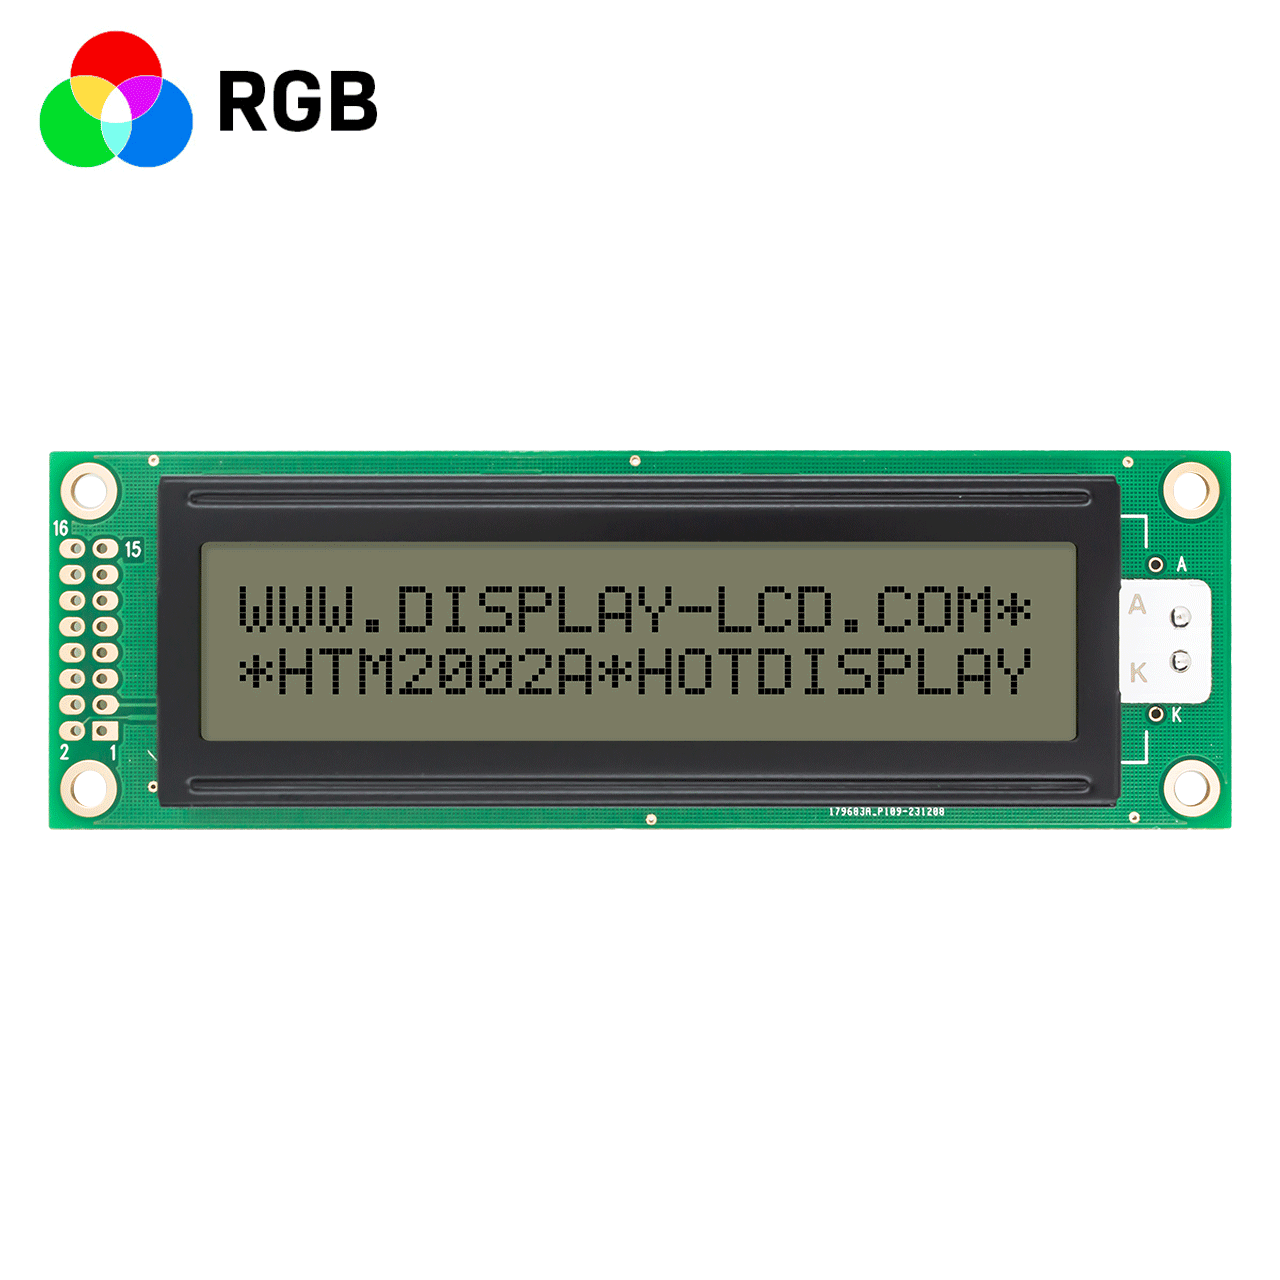 2X20 character LCD screen | FSTN gray RGB display, red, green and blue backlight | 5.0V | Total transflective display | ST7066U controller | Adruino